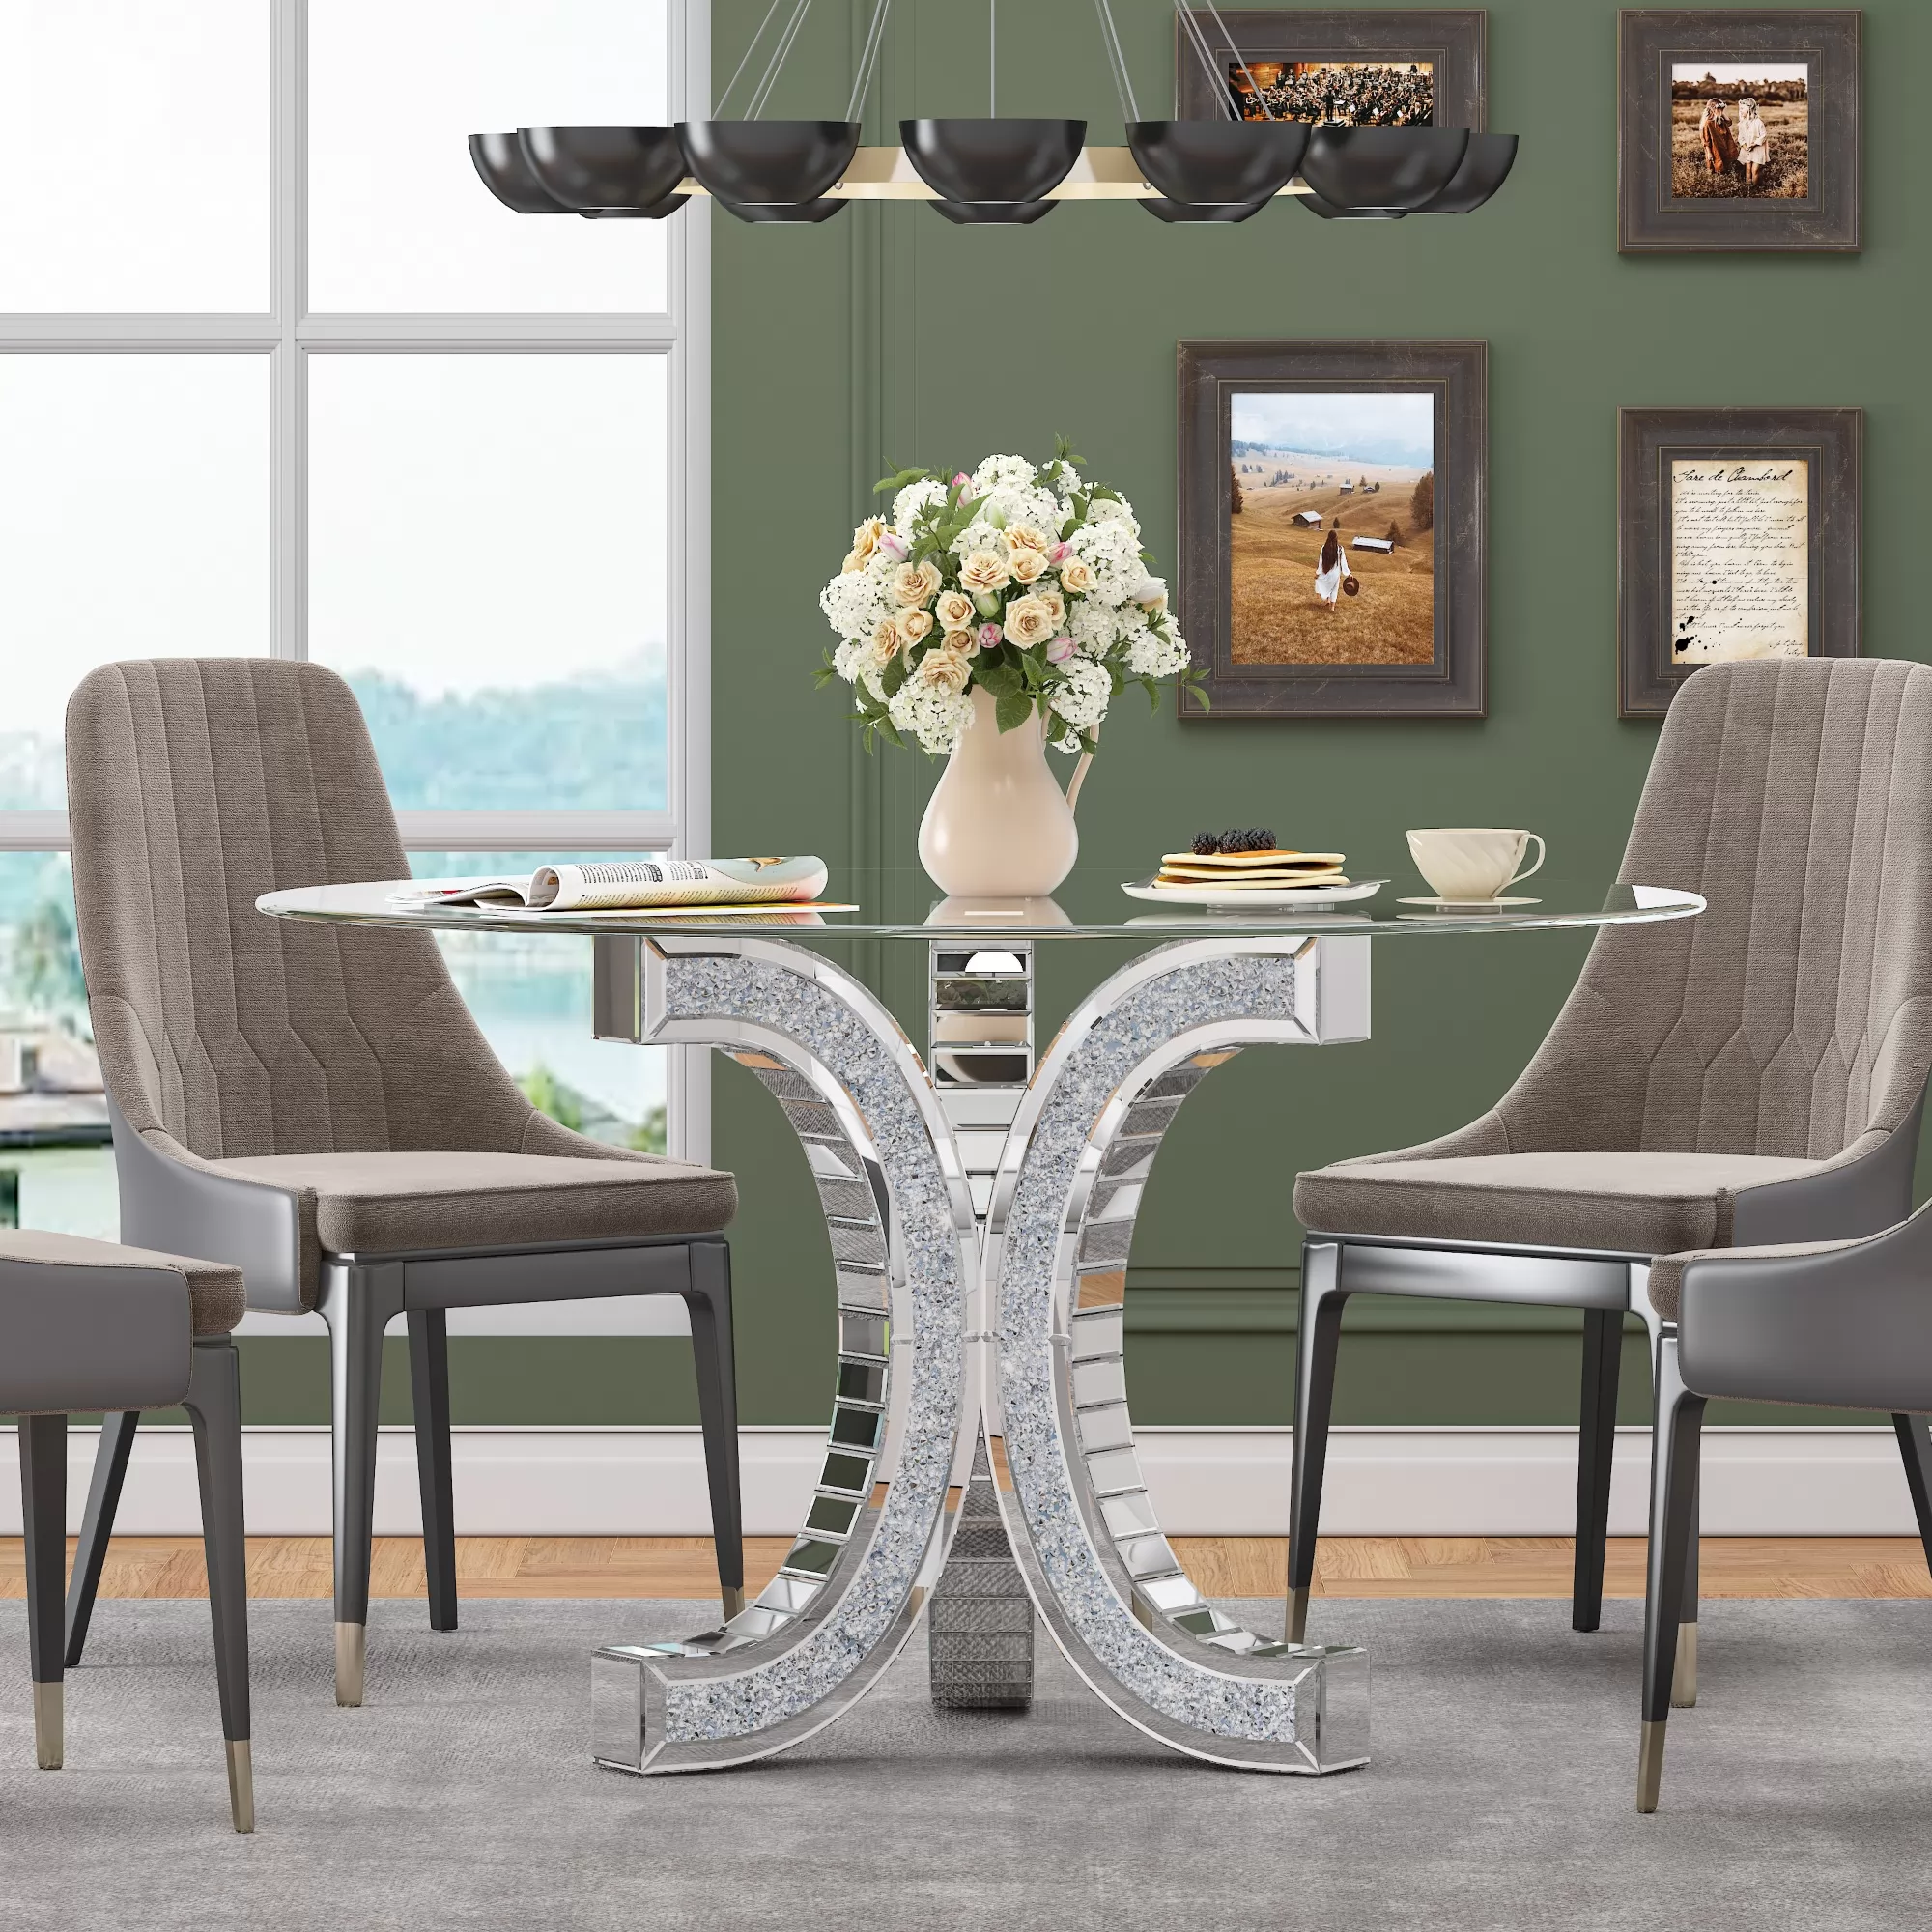 SHYFOY 52'' Mirror Glass Pedestal Dining Table with Tempered Glass Tabletop / SF-DT066